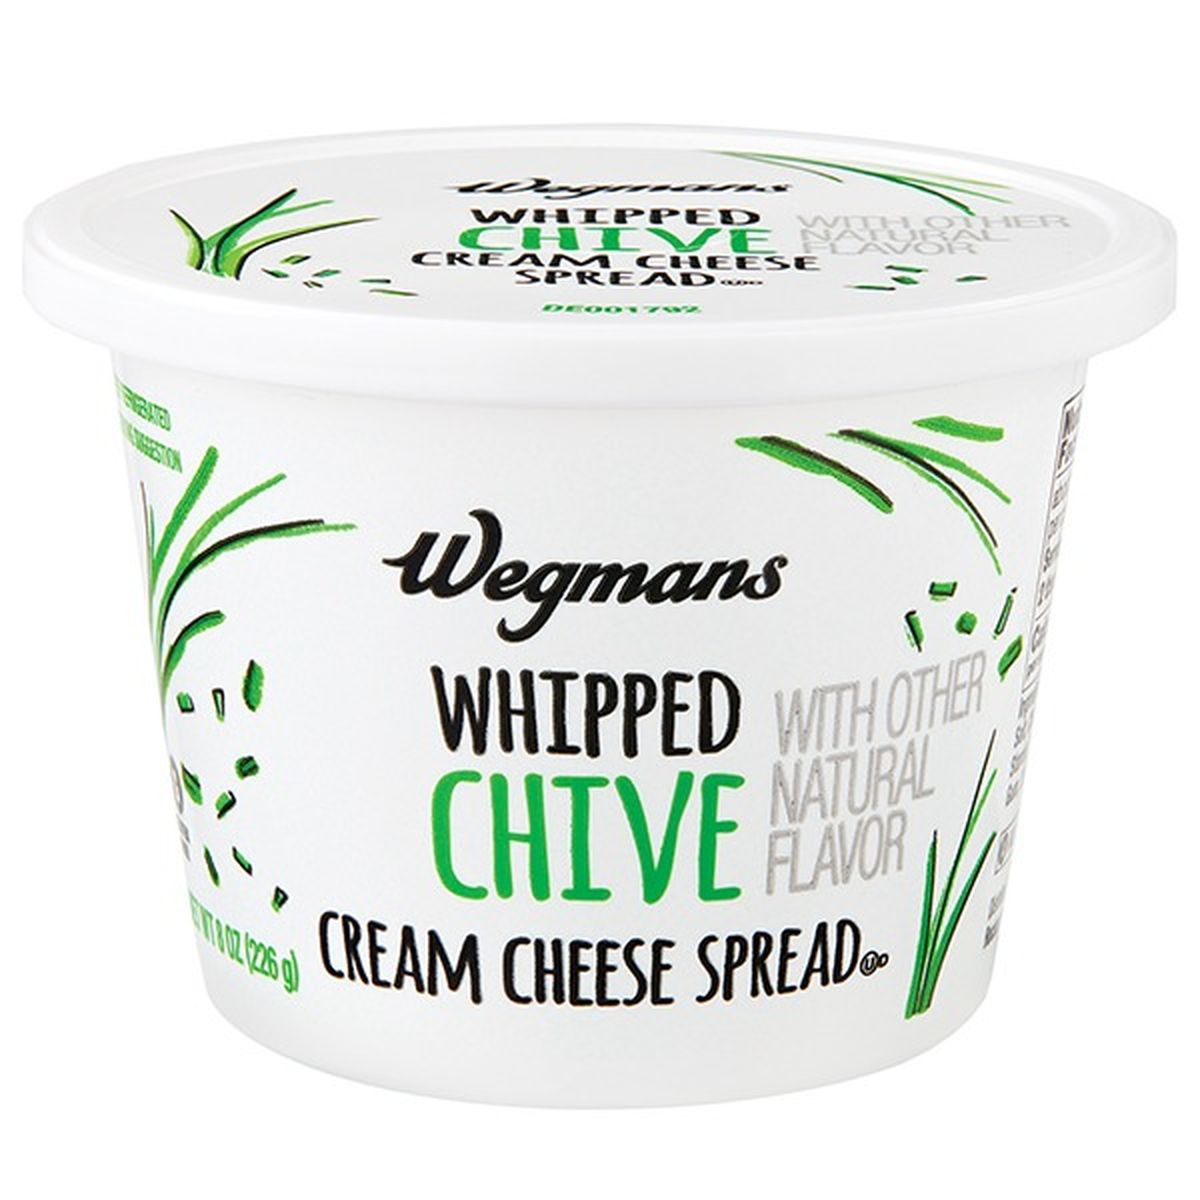 Calories in Wegmans Cream Cheese Spread, Chive, Whipped